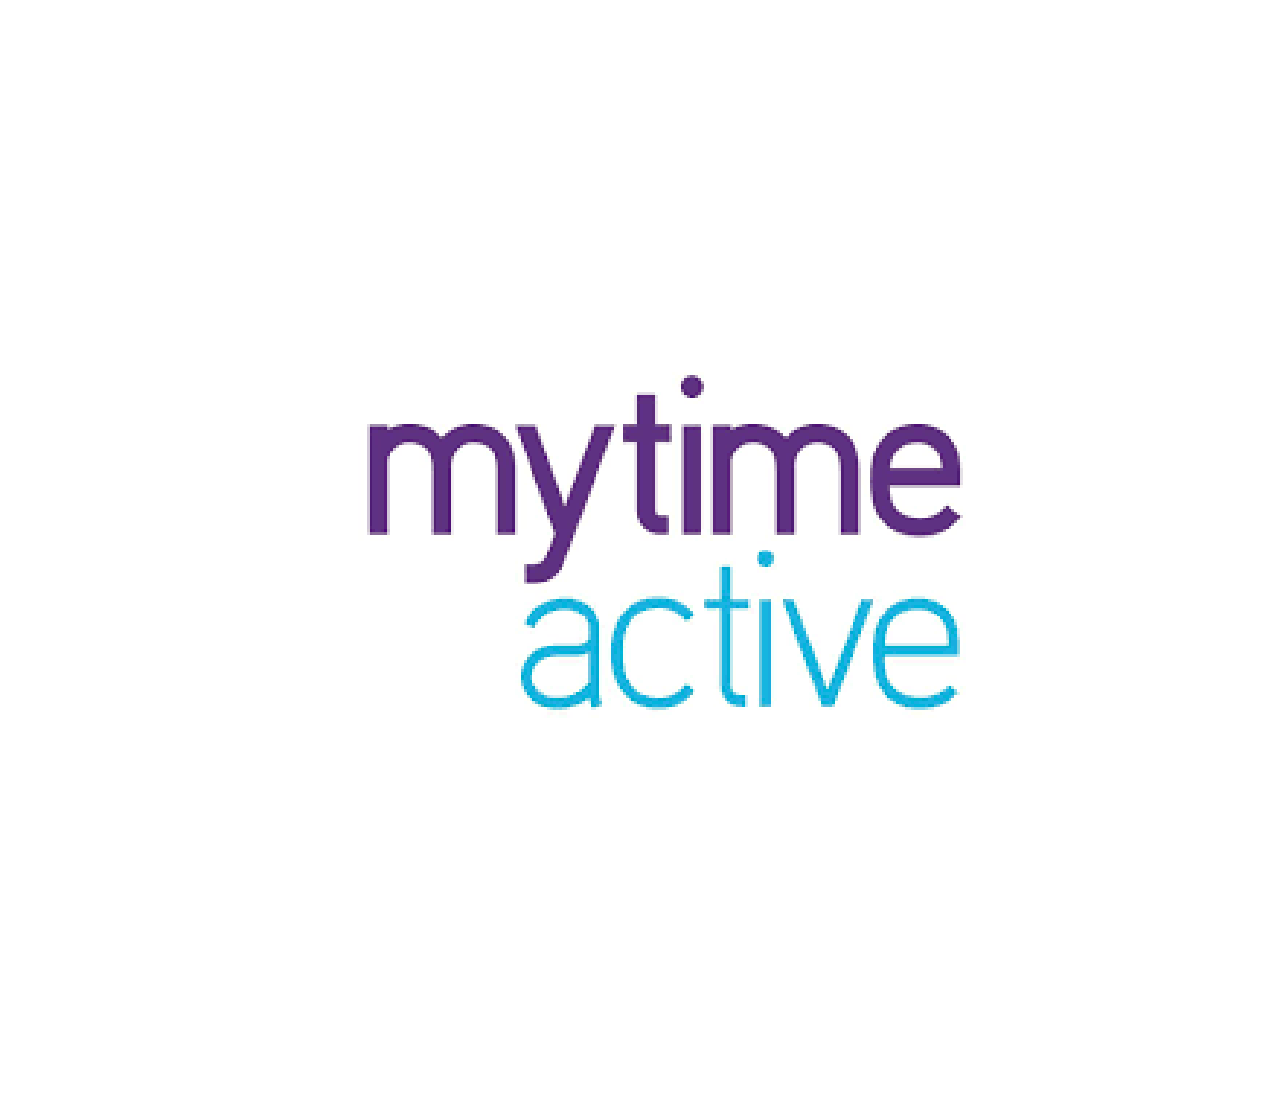 Mytime active